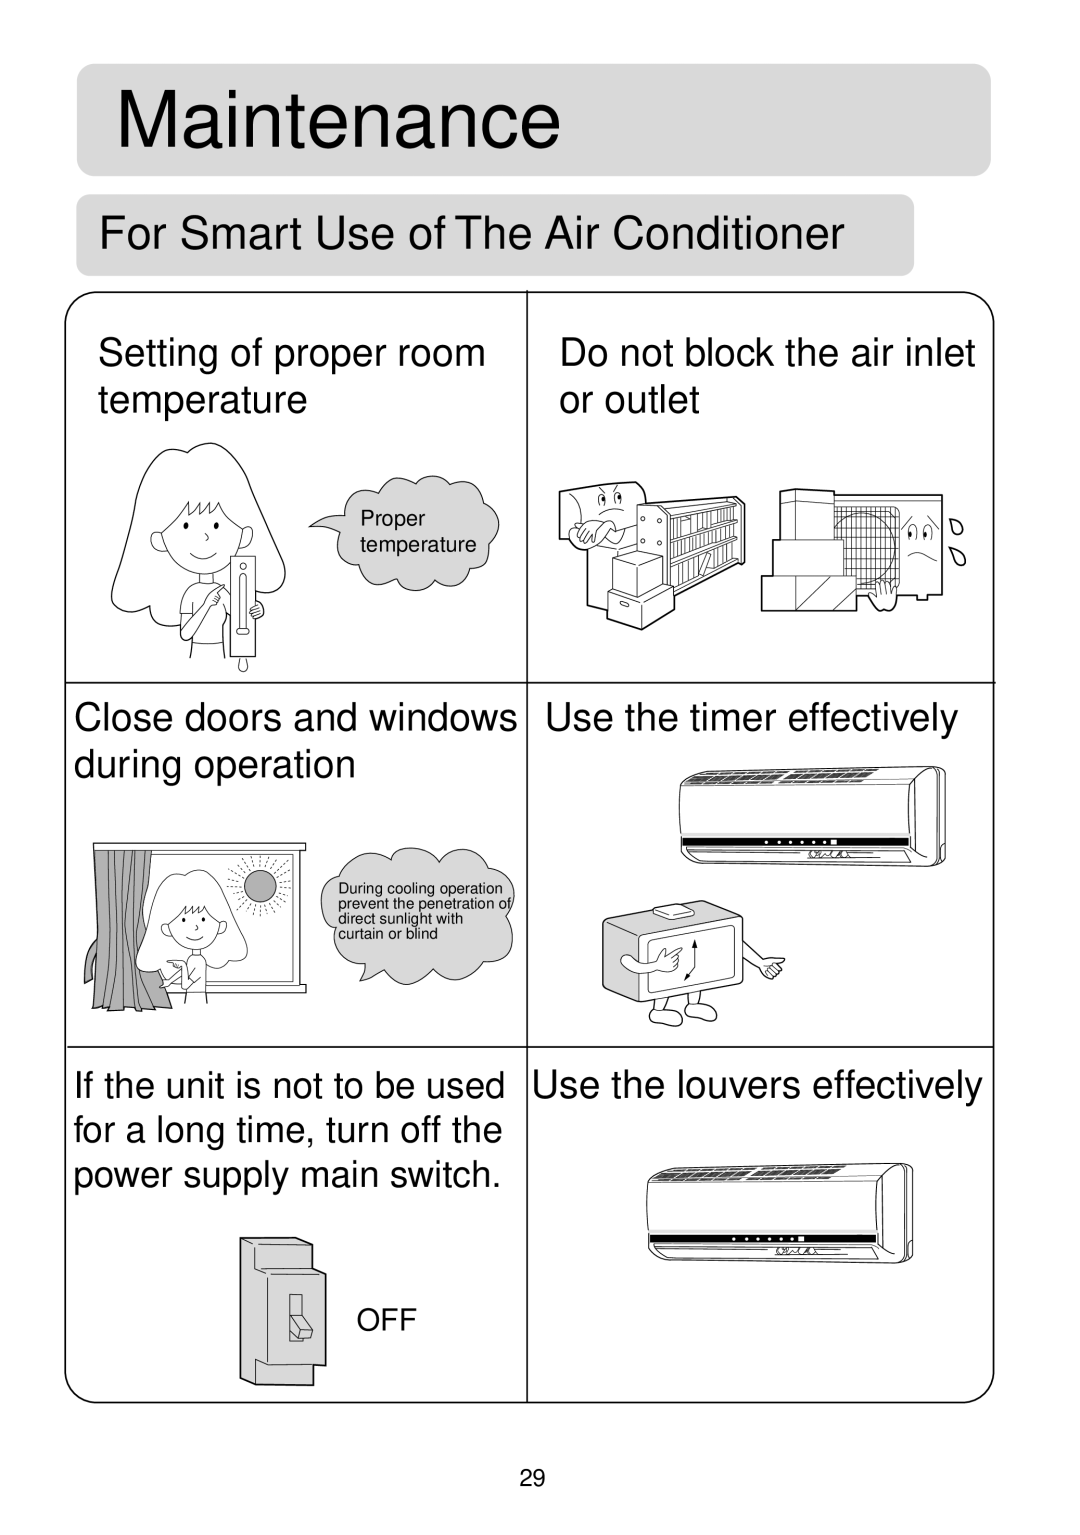 Haier HSM09HS03, 2HUM18H03, HSM12HS03 Maintenance, For Smart Use of The Air Conditioner, Setting of proper room, or outlet 